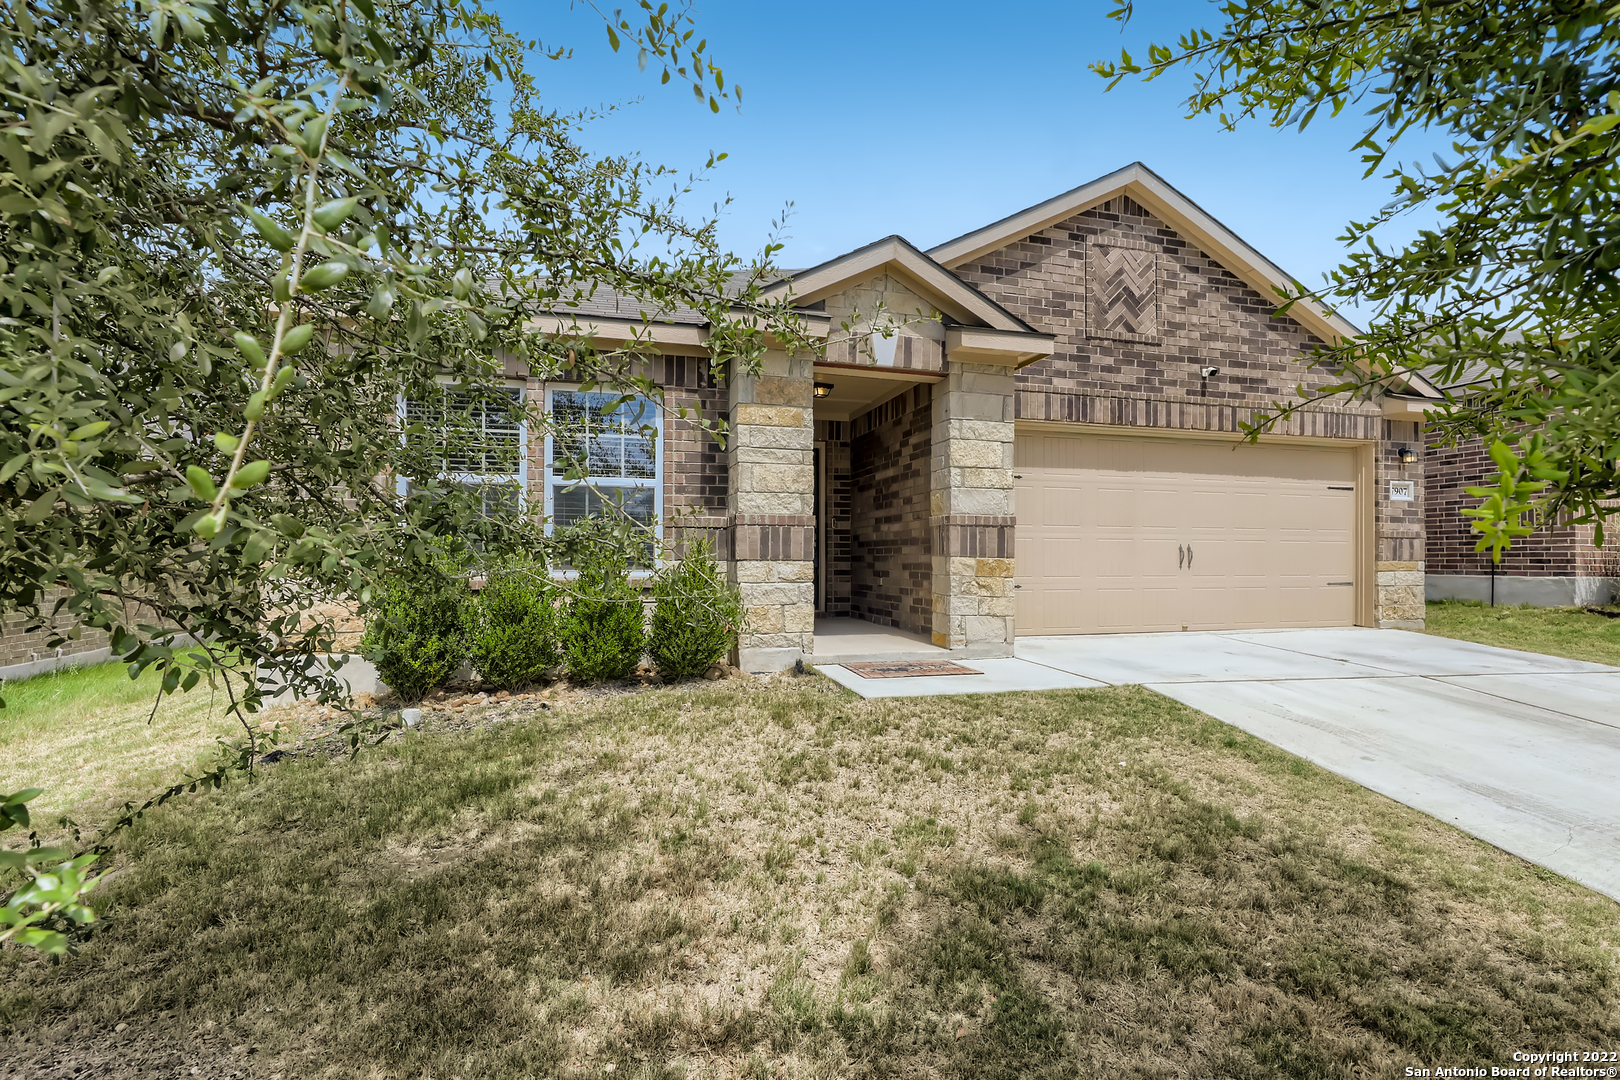 Click the Virtual Tour link to view the 3D Tour. Lovely one story brick and stone home just built in 2018 about 30 minutes from downtown San Antonio. Dark wood cabinets and granite countertops line this spacious kitchen with a built in breakfast bar and kitchen island. The kitchen has a great view of the eating area and living room, you'll never miss any of the action here! The dining area has a gorgeous chandelier and has a great view of the covered patio in the fenced in backyard. The master closet is everyone's dream with tons of built in shelving. Don't forget to take advantage of the many amenities provided by the Talise De Culebra community including the sparkling pool, huge clubhouse, fun playground and lovely walking trails.